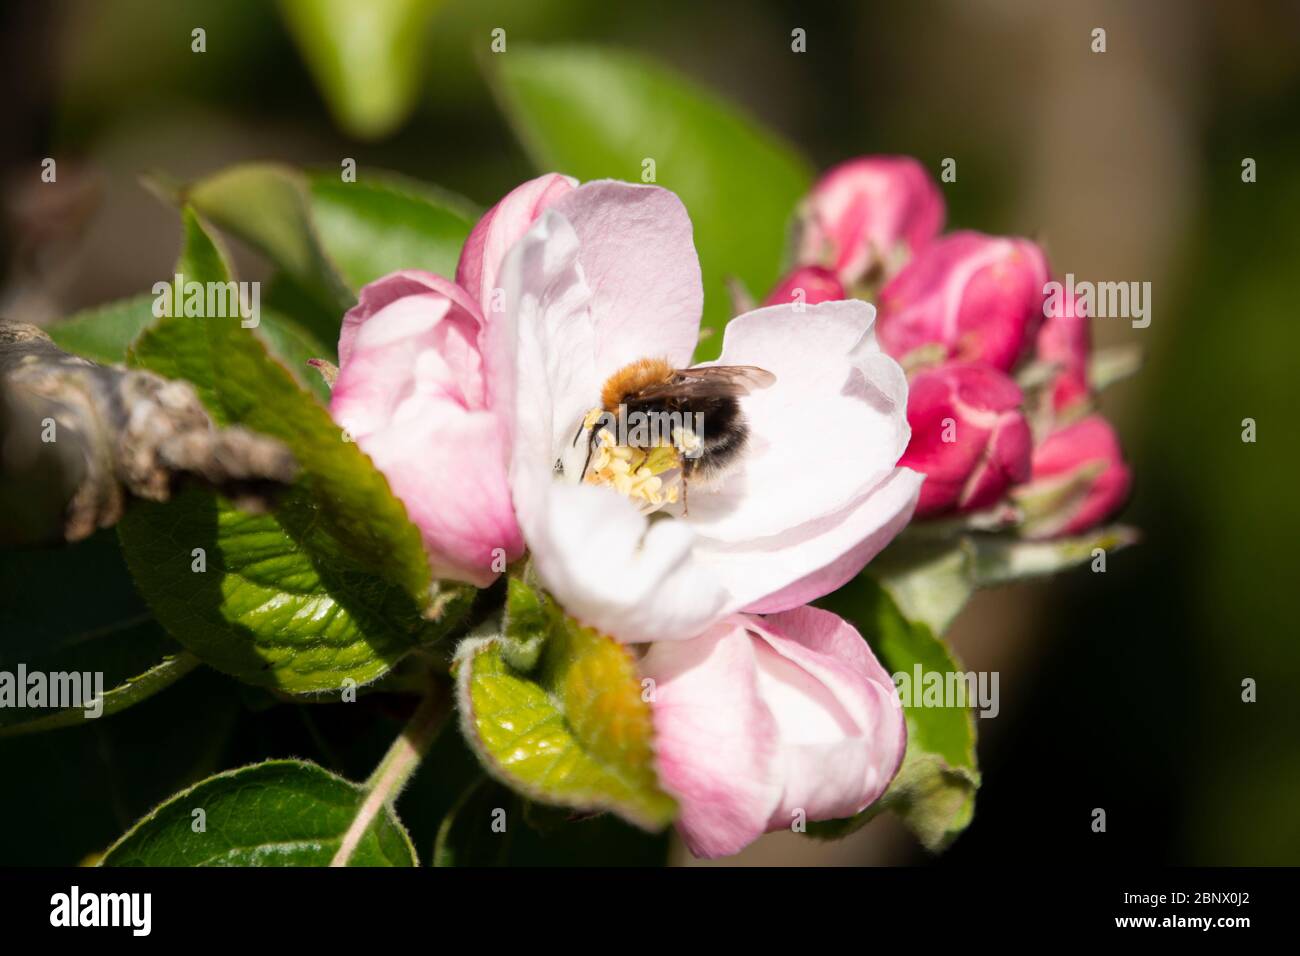 Opened apple blossom with Tree Bumble bee collecting nectar in spring Stock Photo